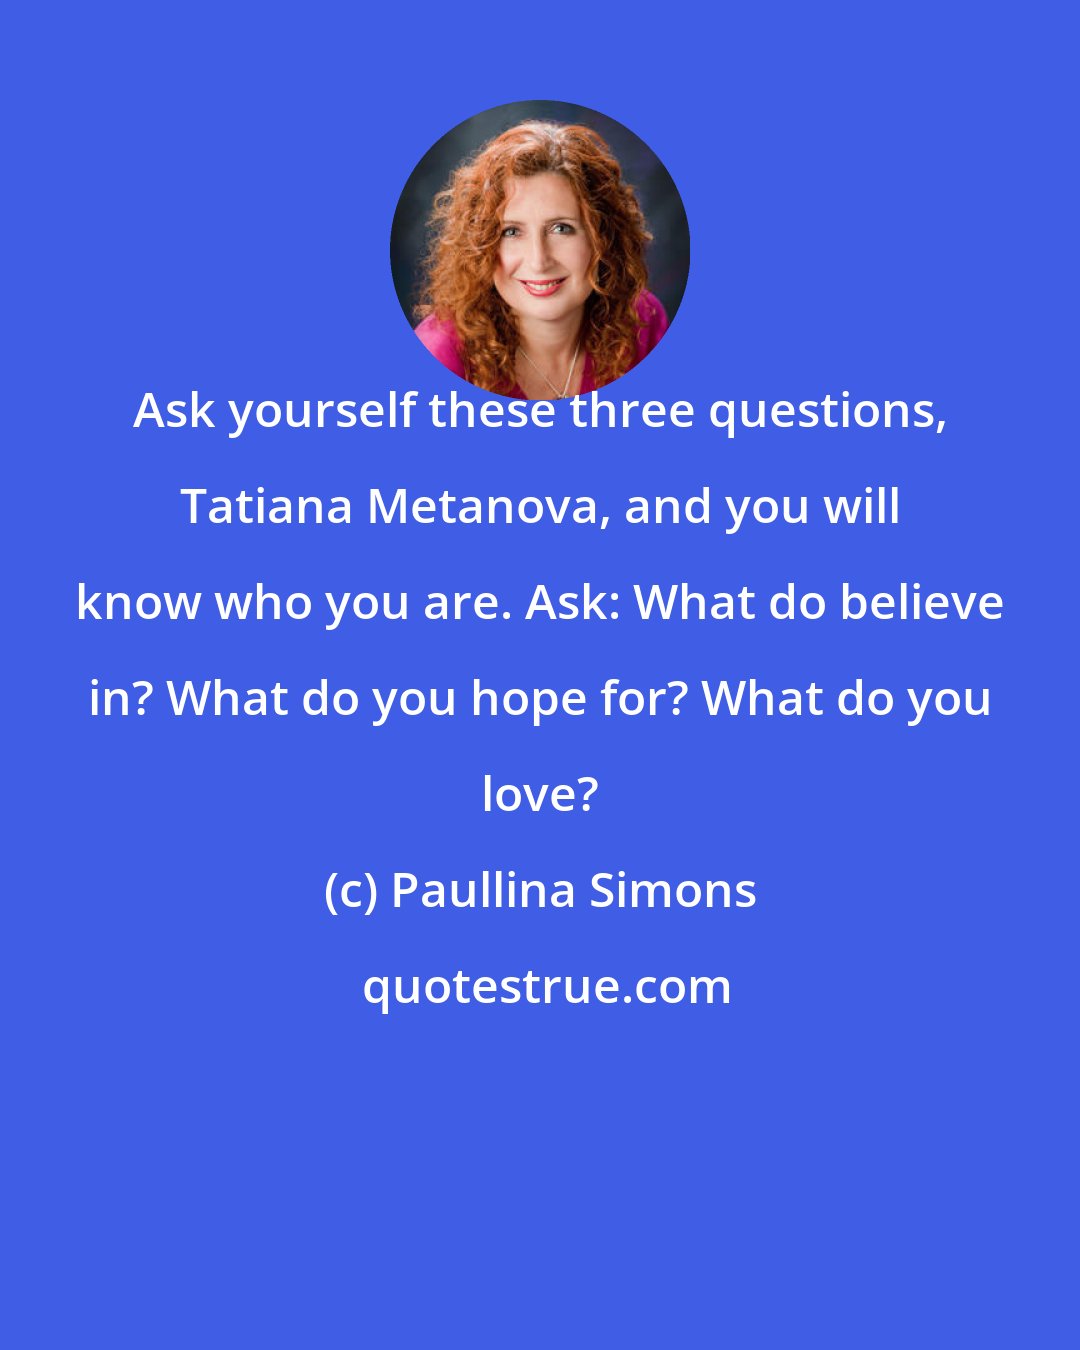 Paullina Simons: Ask yourself these three questions, Tatiana Metanova, and you will know who you are. Ask: What do believe in? What do you hope for? What do you love?